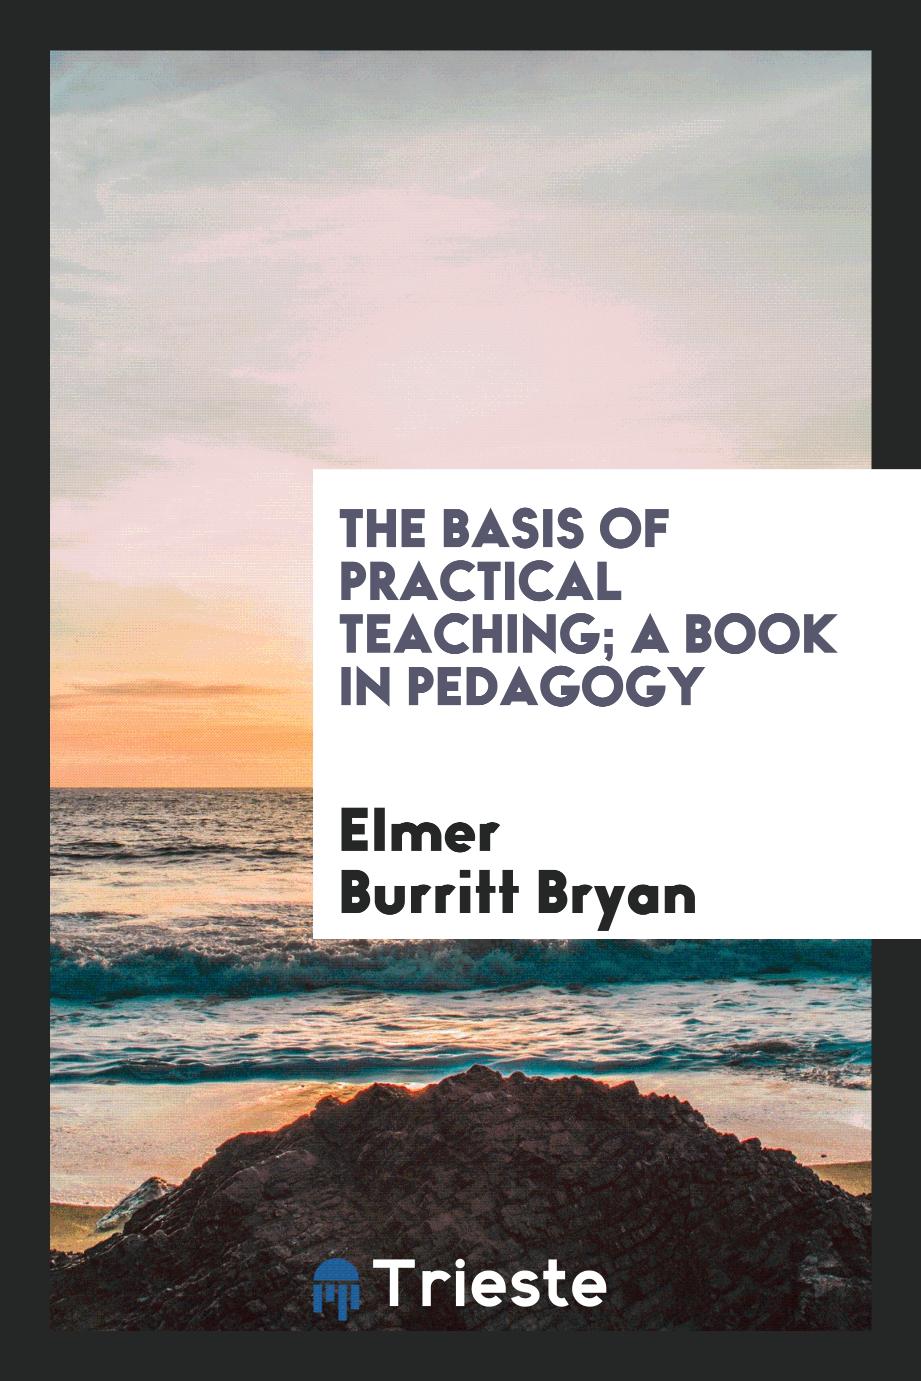 The basis of practical teaching; a book in pedagogy